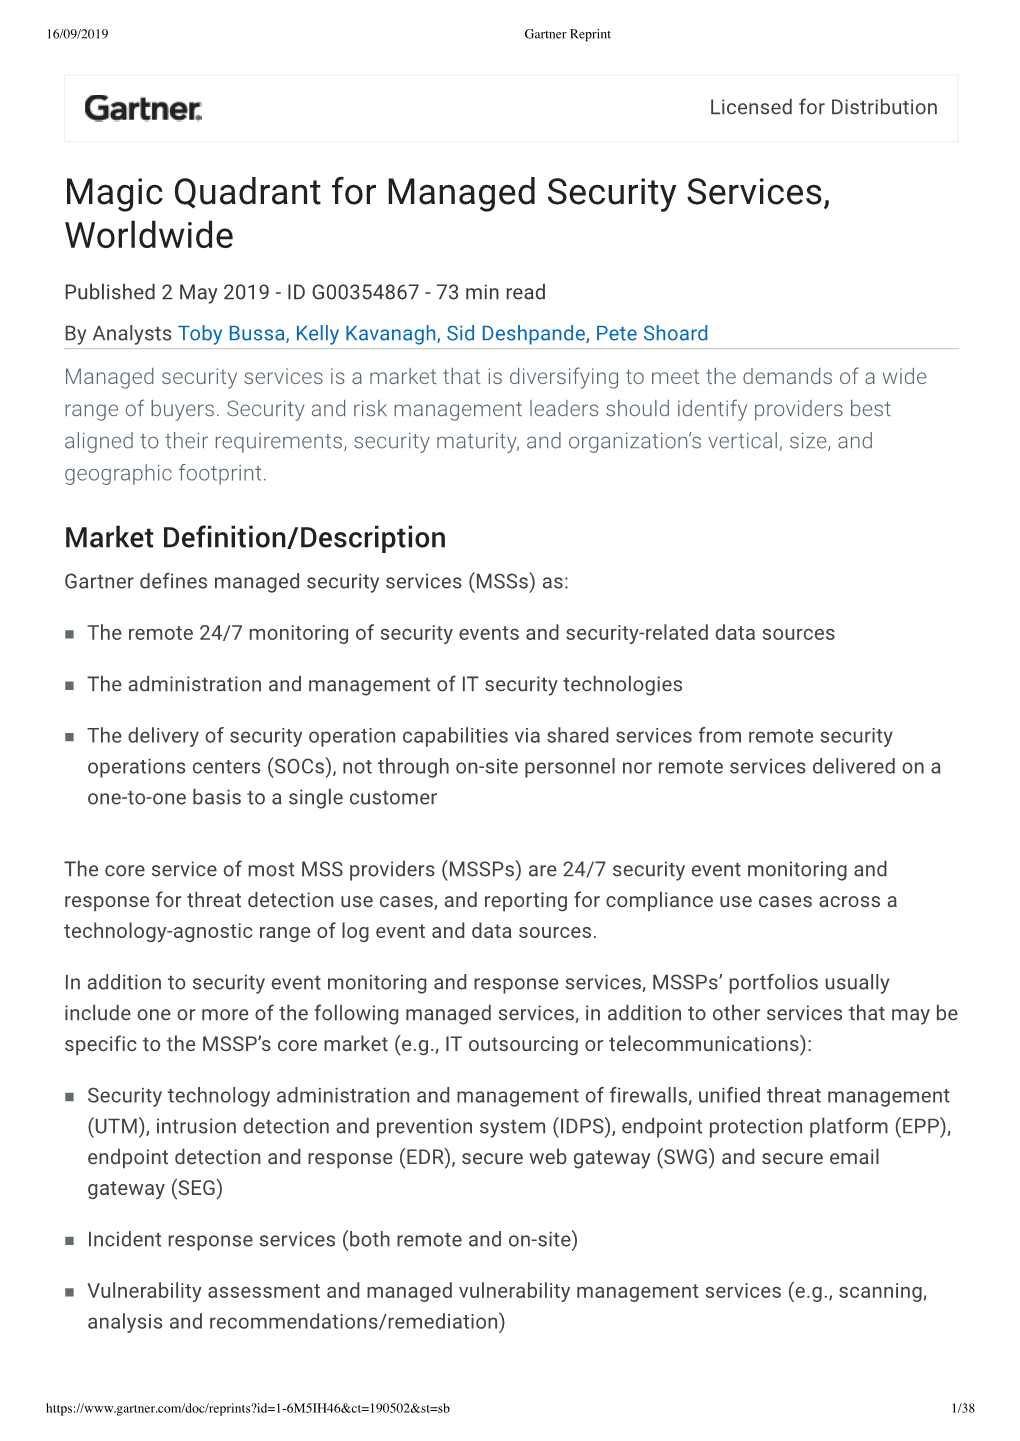 Magic Quadrant for Managed Security Services, Worldwide